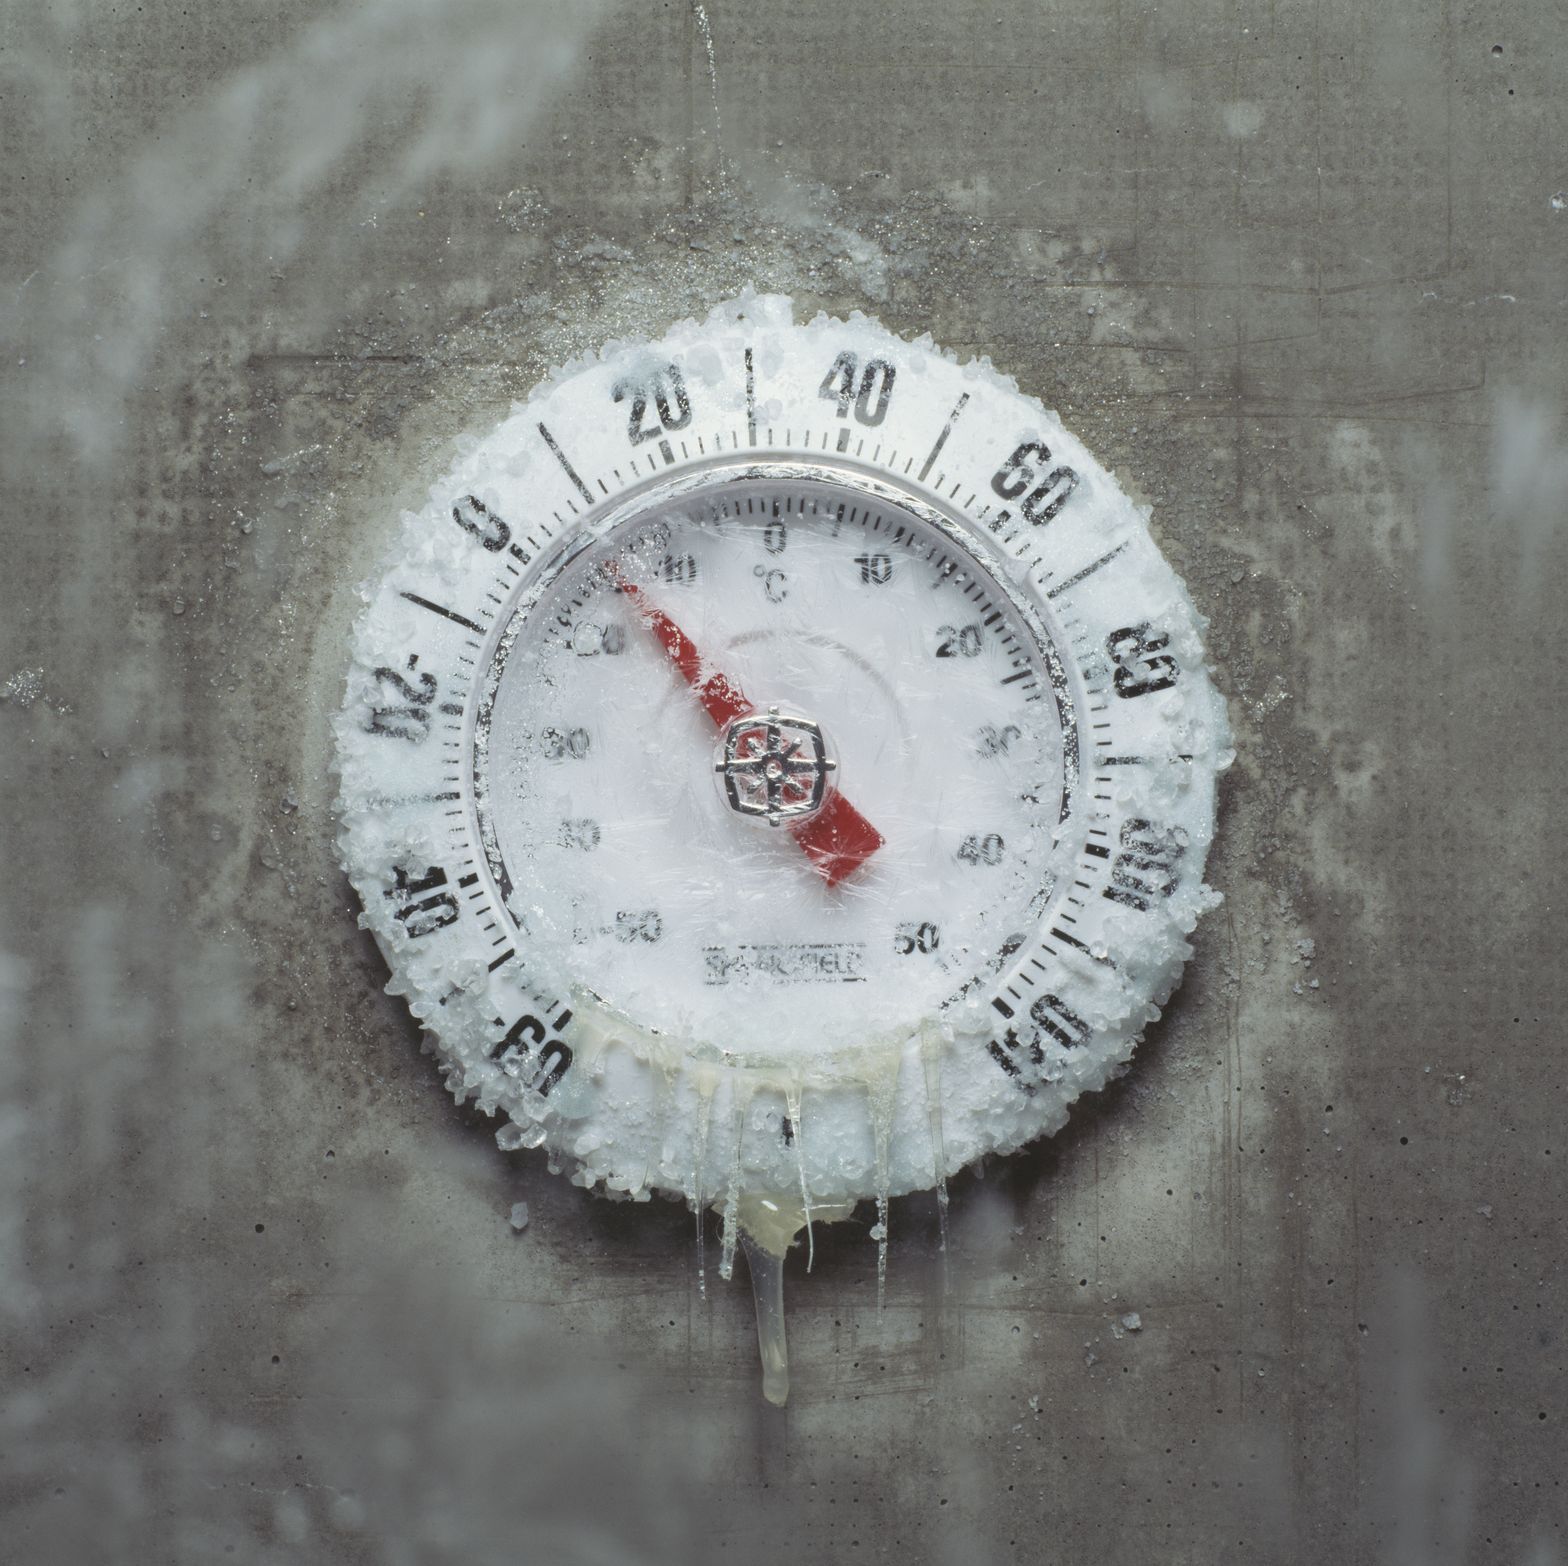 Scientists Just Created the Coldest Temperature Ever Recorded in the Lab